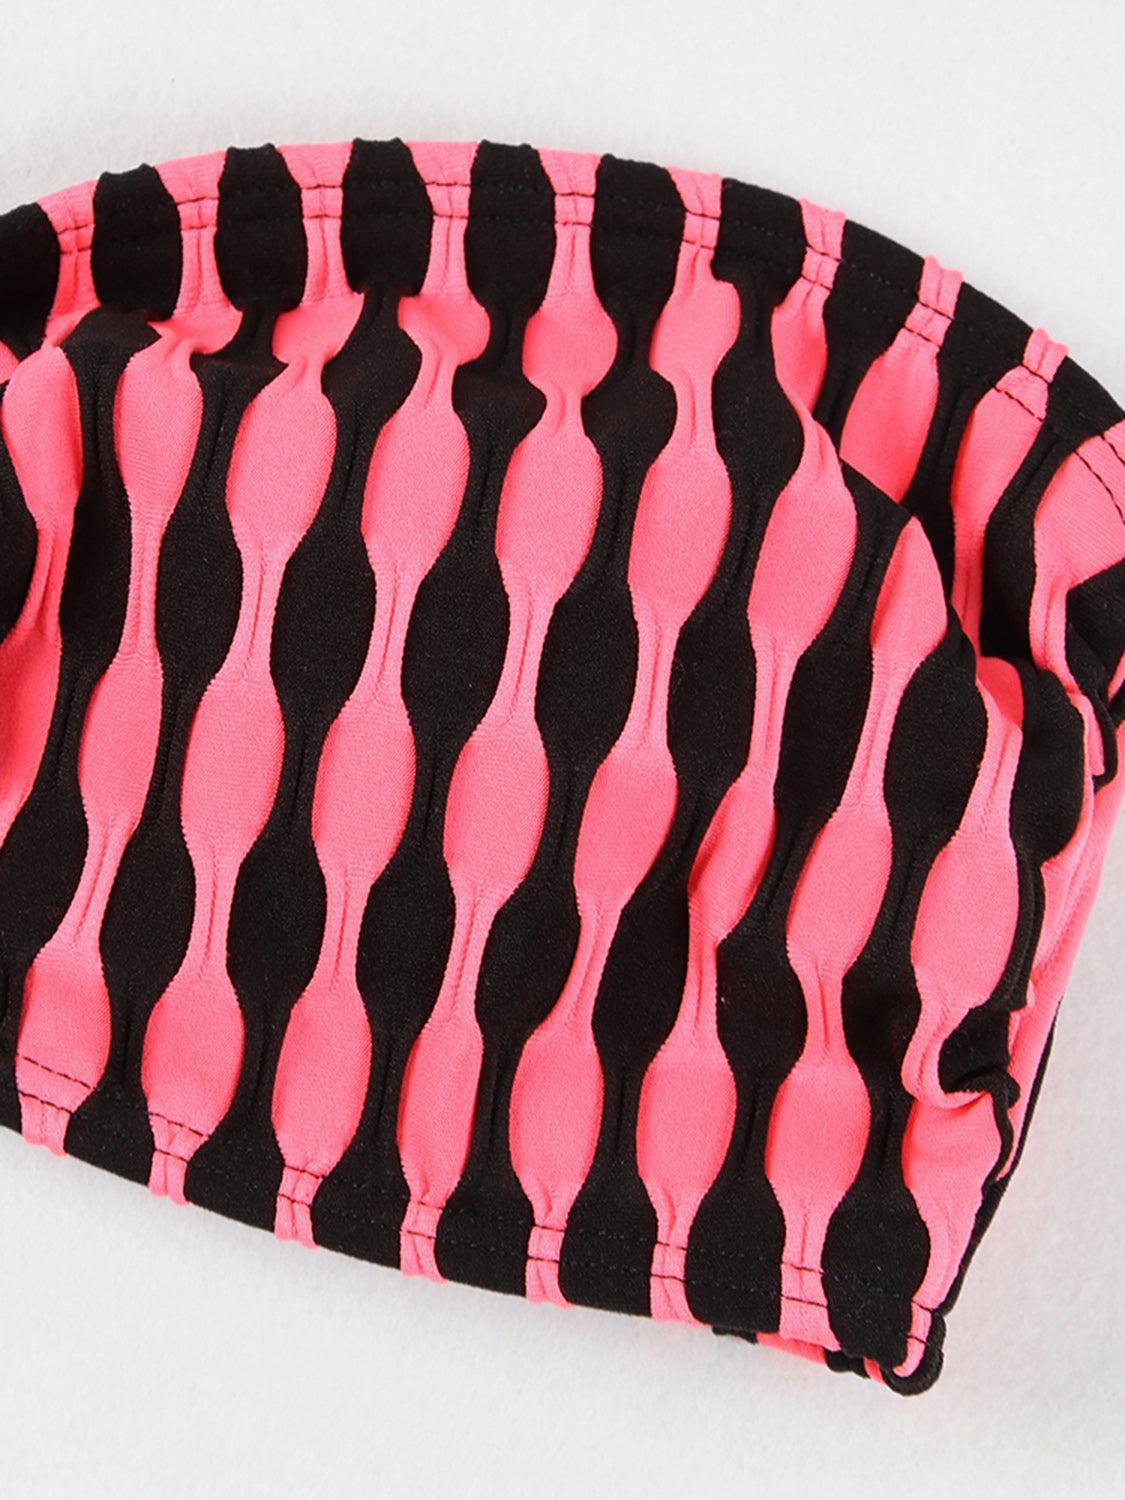 a close up of a pink and black bag on a white surface